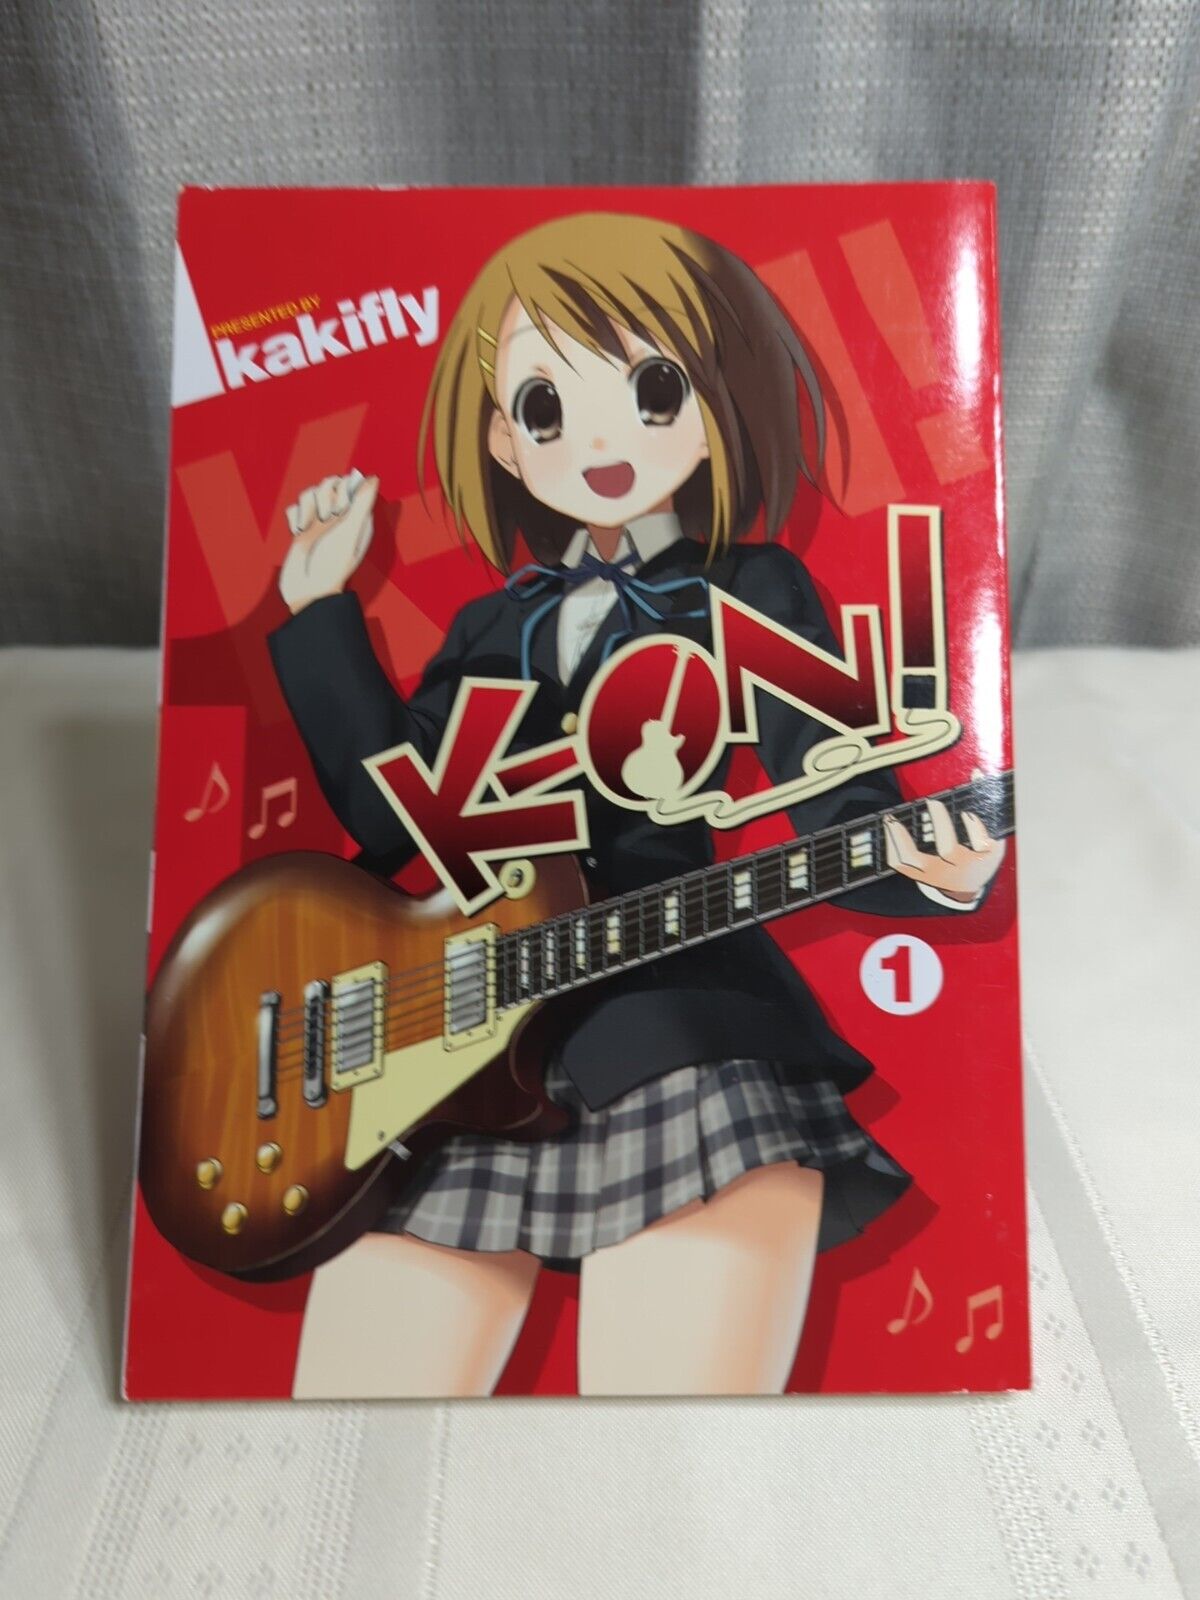 K-ON, Vol. 1 by Kakifly (Paperback, 2010) Excellent Condition English Manga